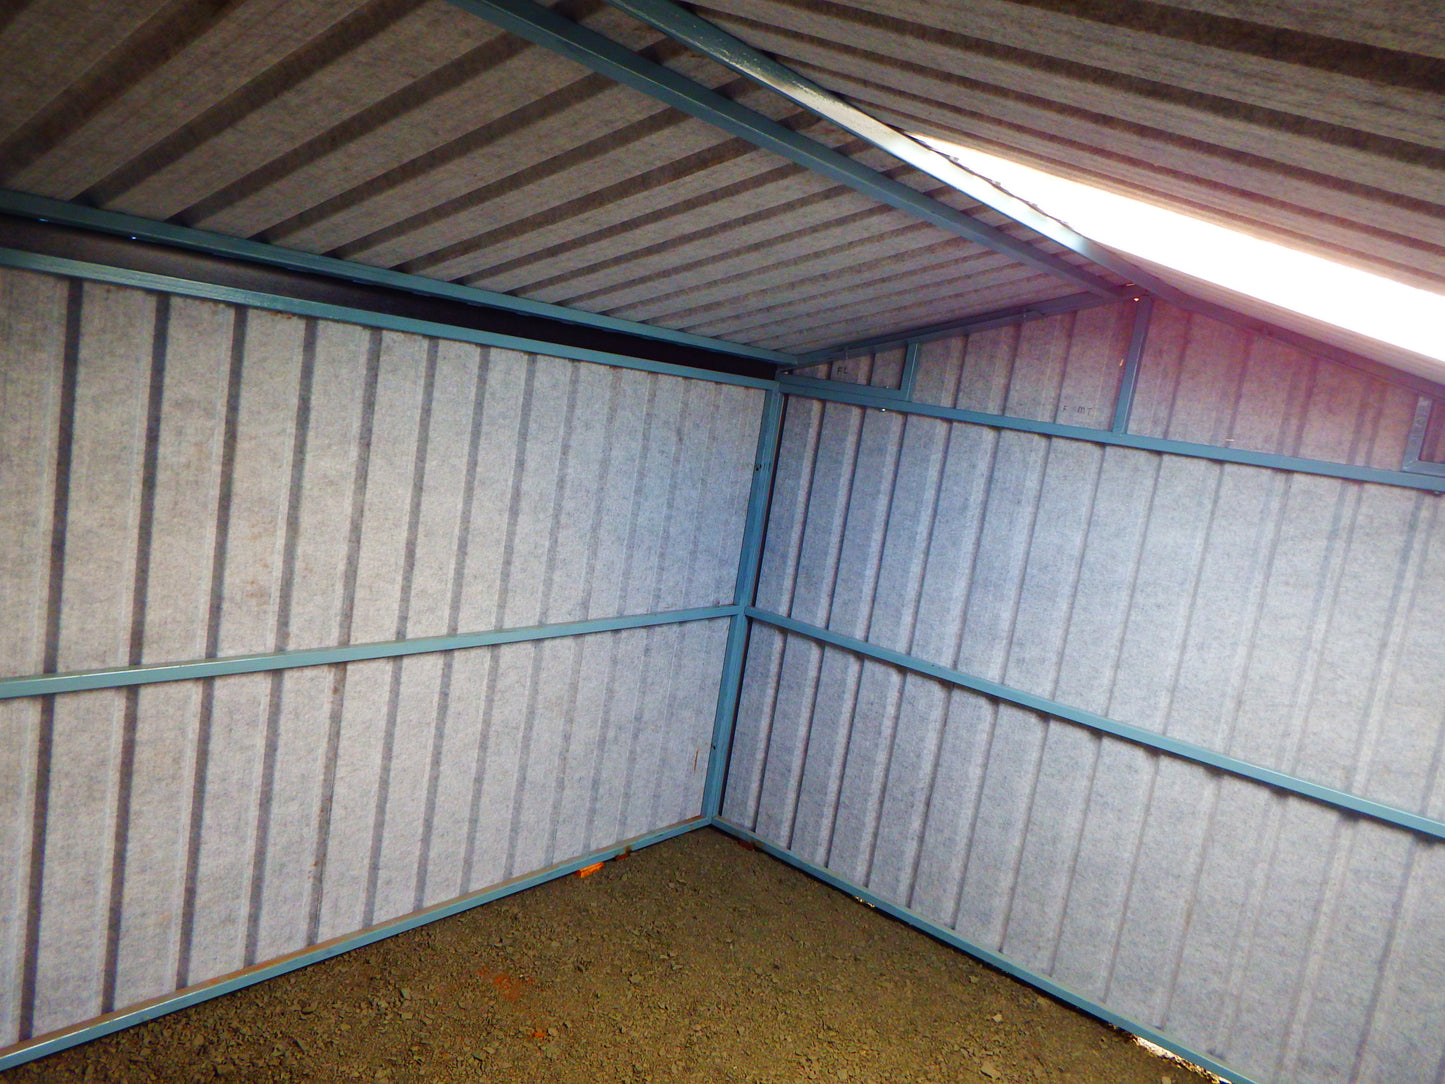 Premium Custom Manufactured Heavy Duty Shed 10ft wide x 10ft deep